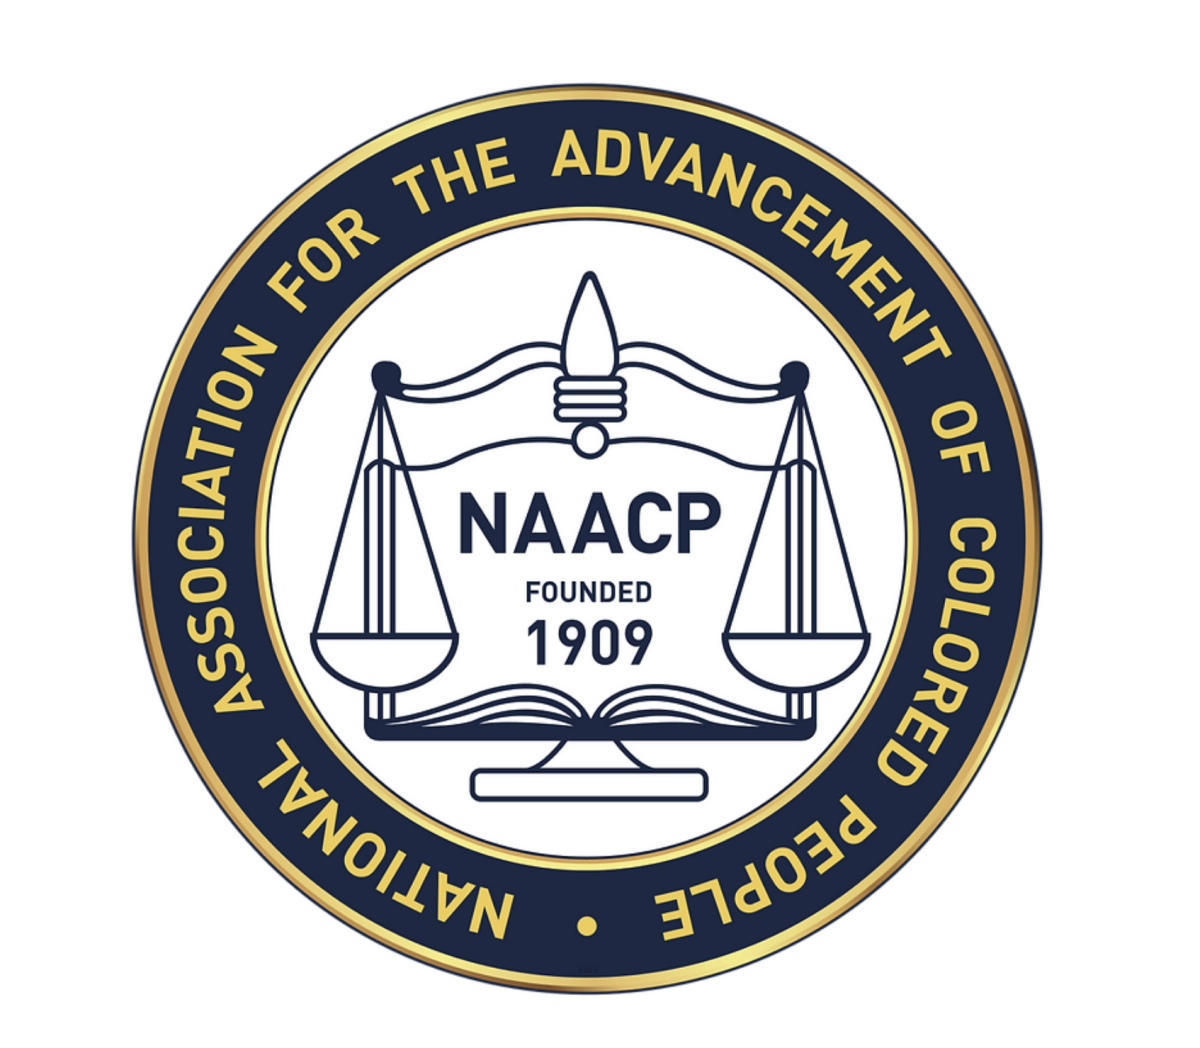 Nominations open for NAACP Award